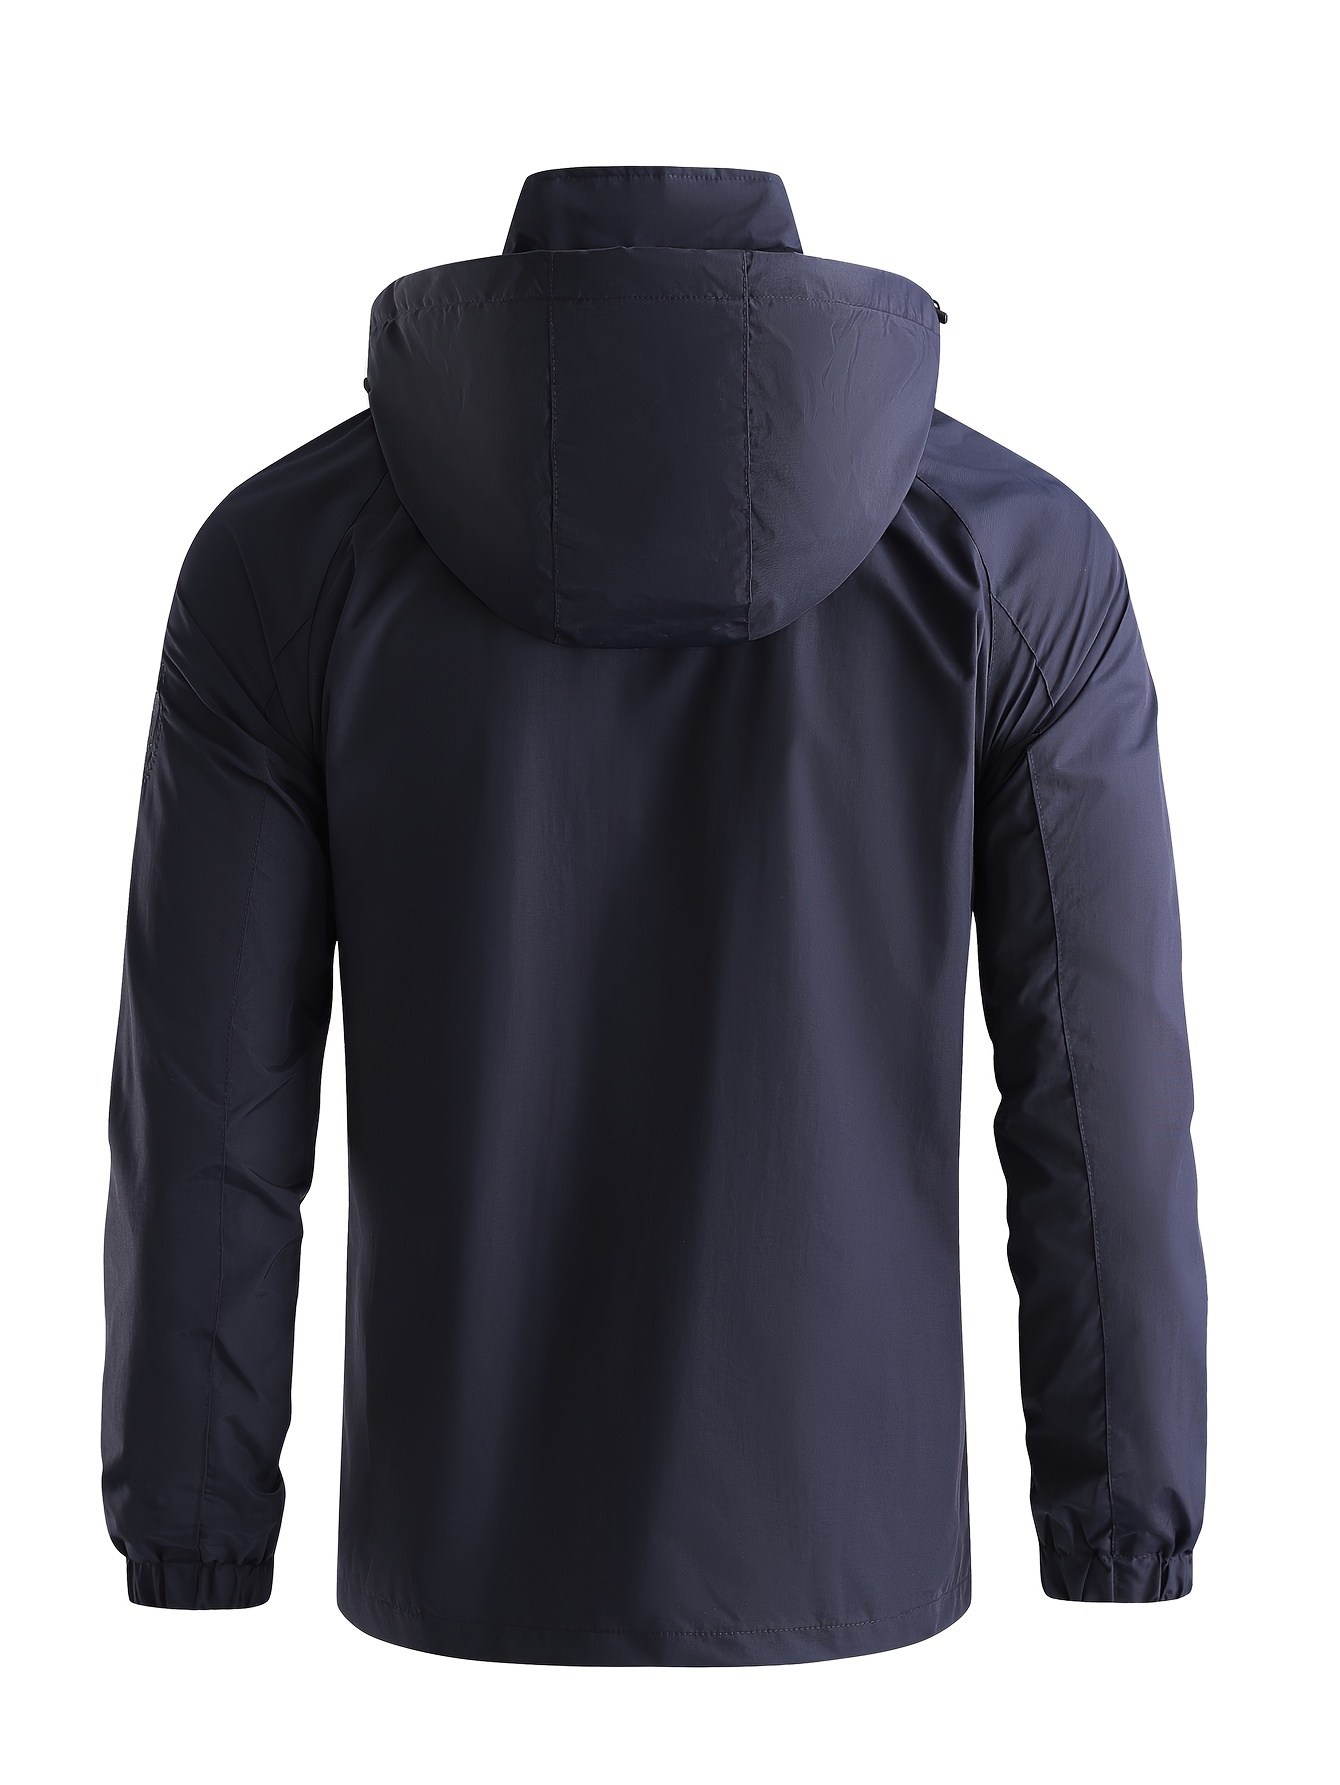 mens fall winter casual lightweight windbreaker hooded jacket with zipped pockets details 4